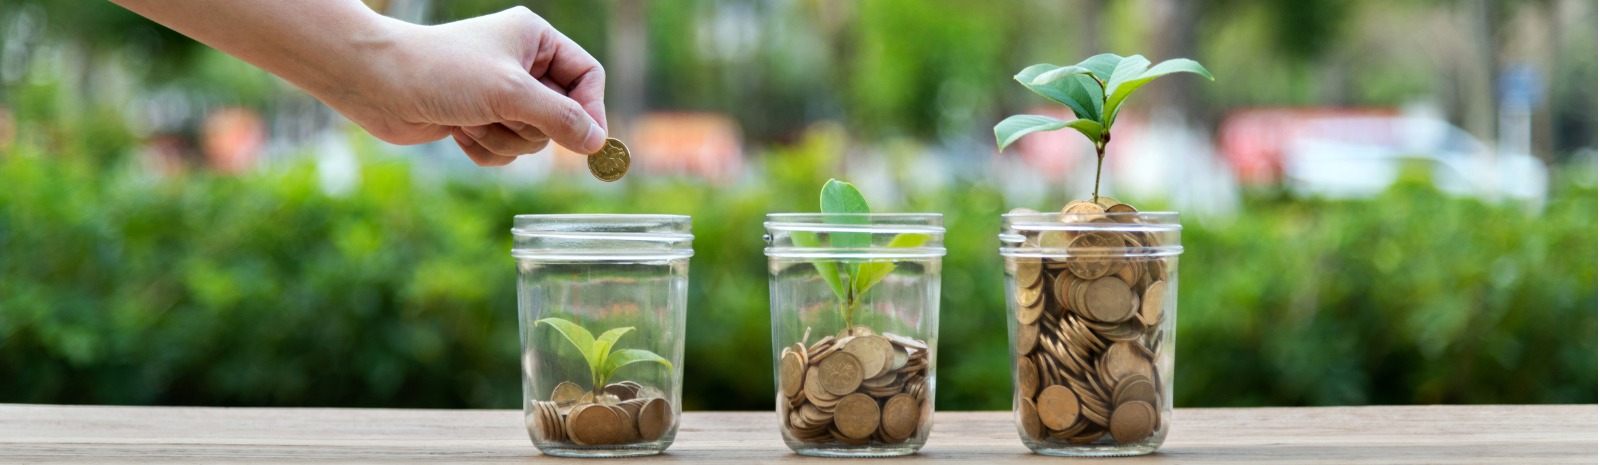 Coins in three jars with plants growing as jars fill up